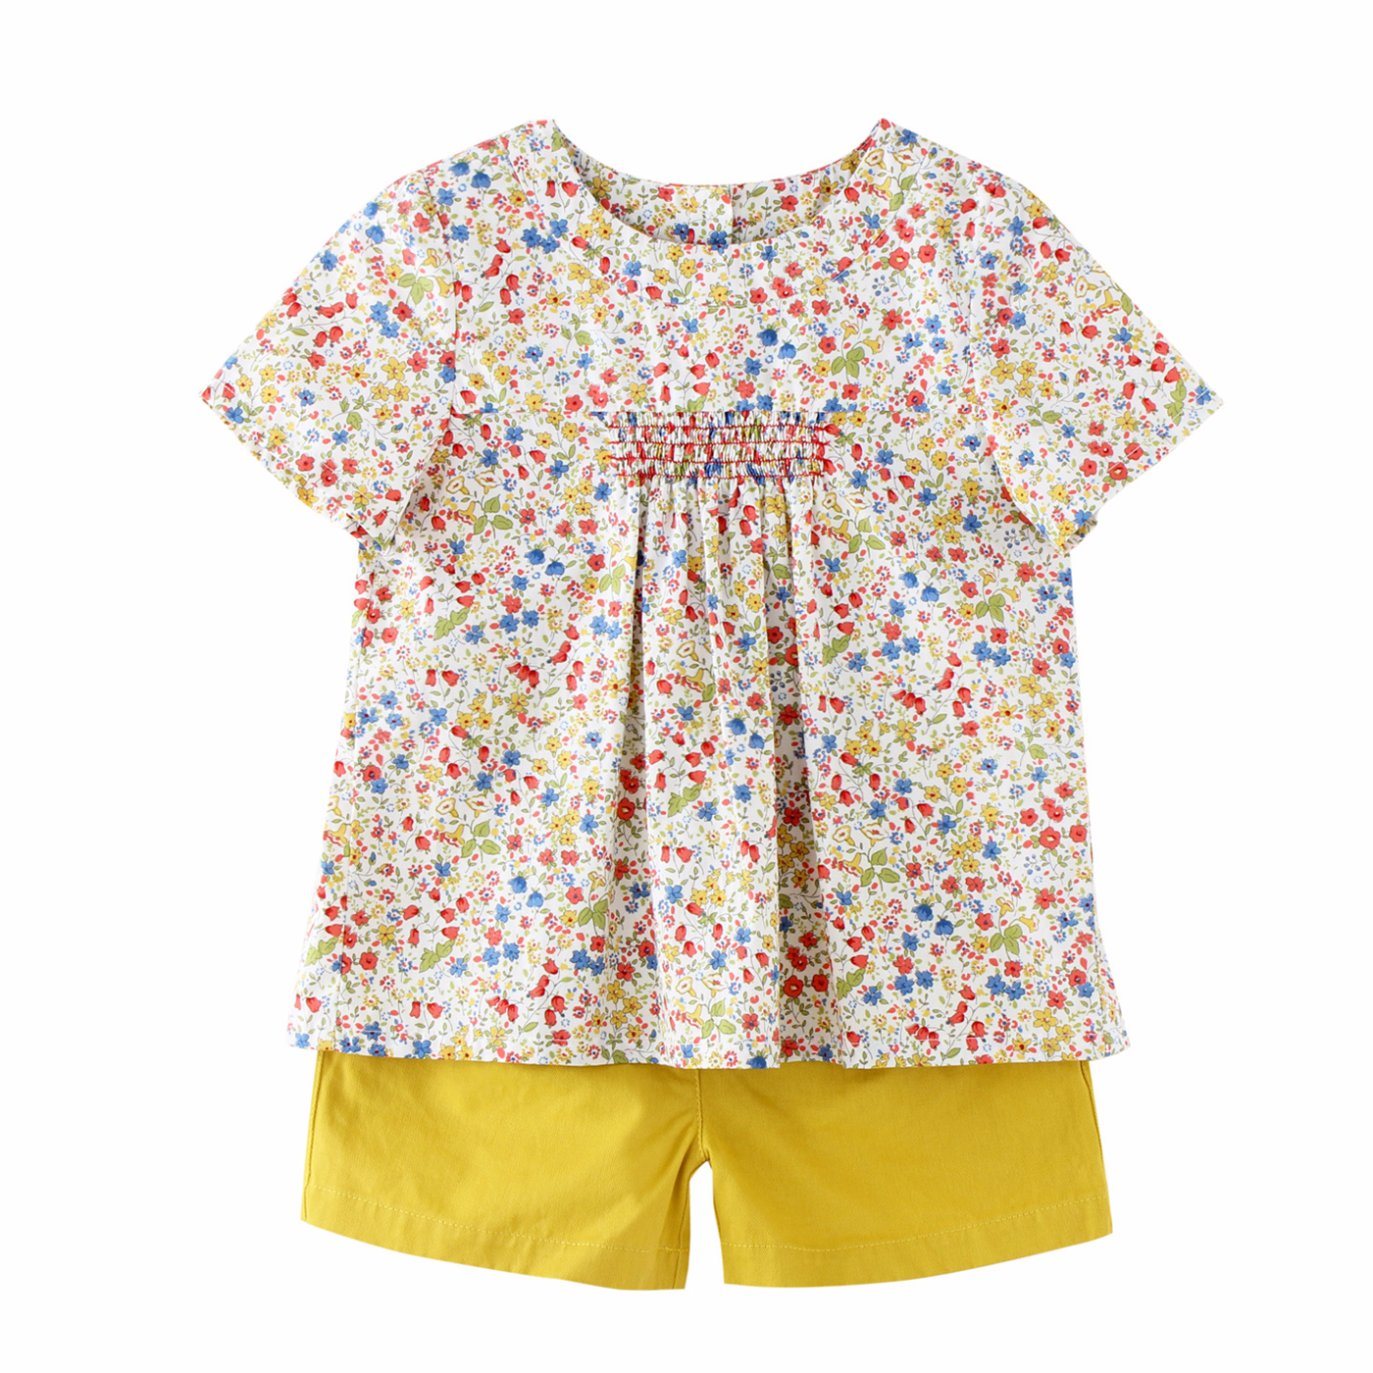 Baby Infant Kids Children's Wear Clothes Clothing Shirts